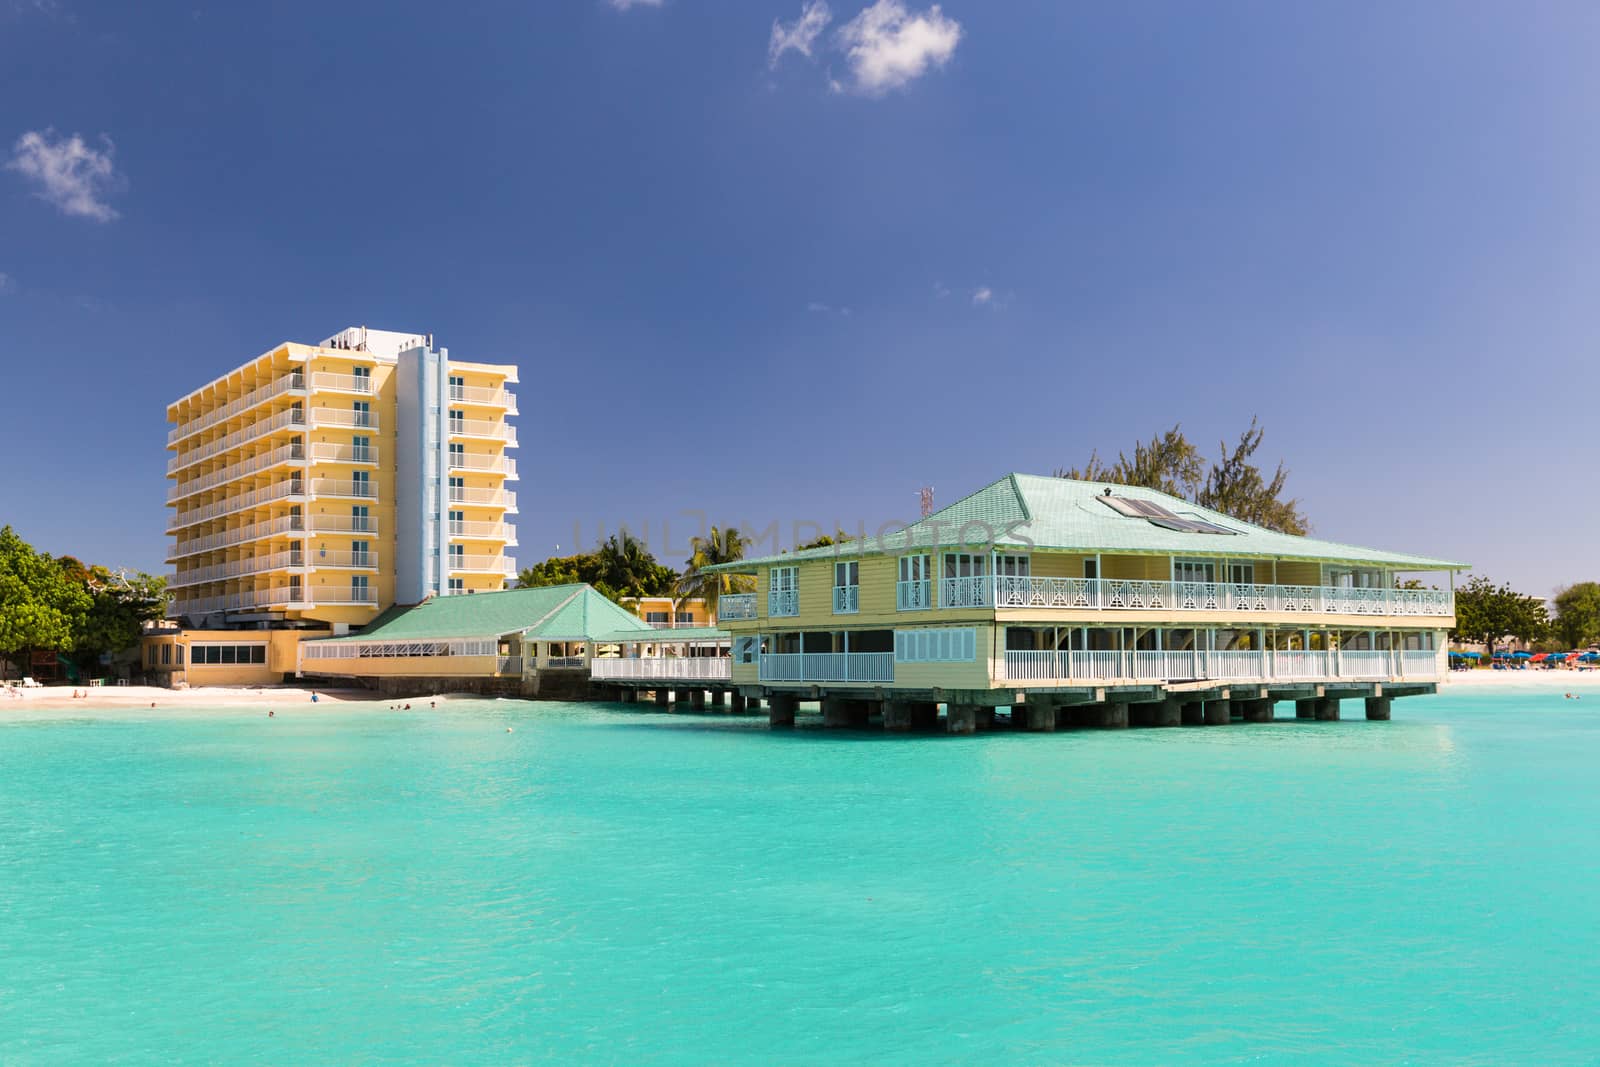 View of a hotel from a Catamaran in Carlisle Bay in Barbados by chrisukphoto